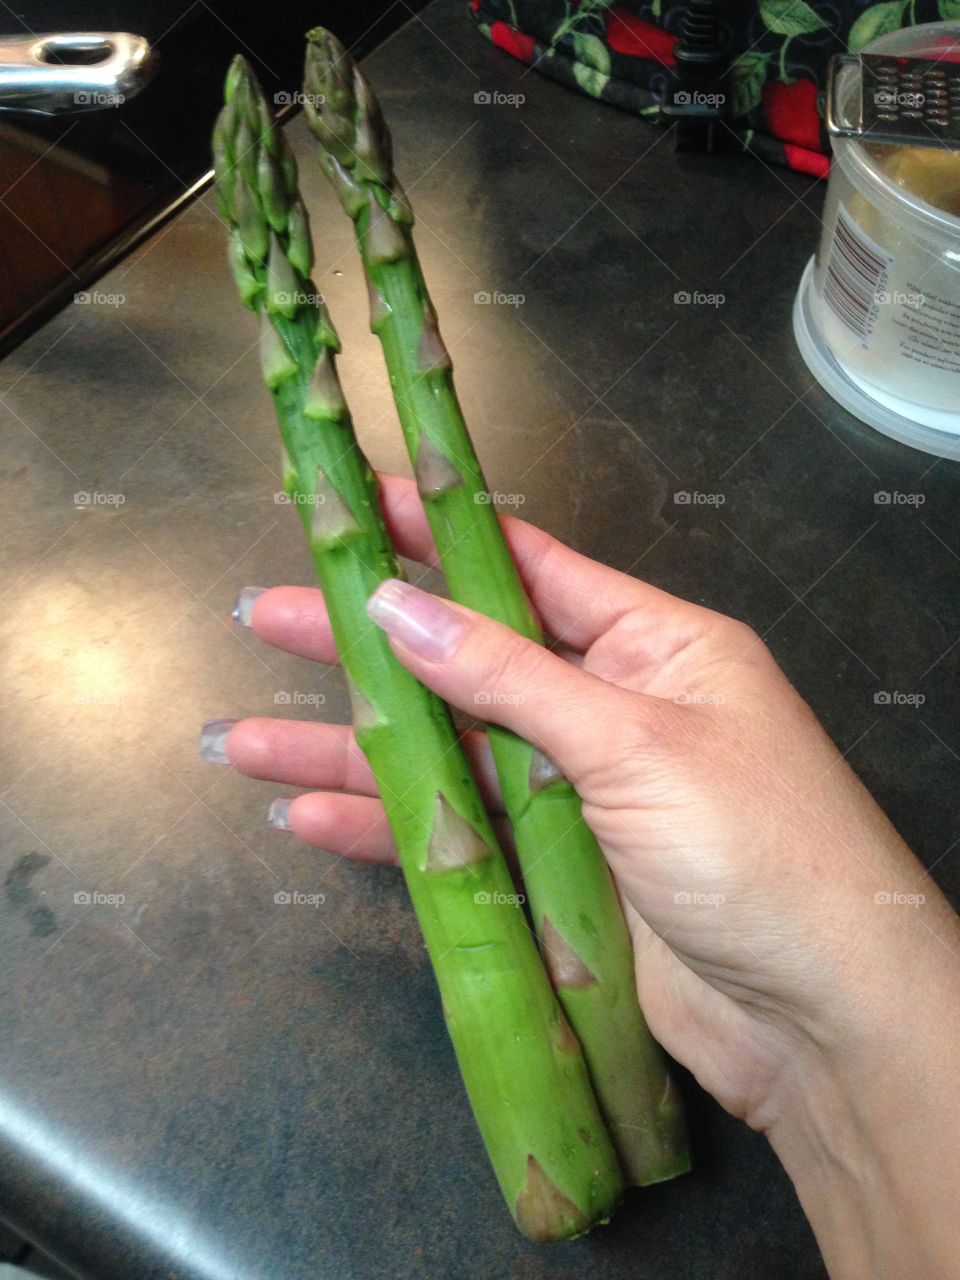 Large asparagus in hand